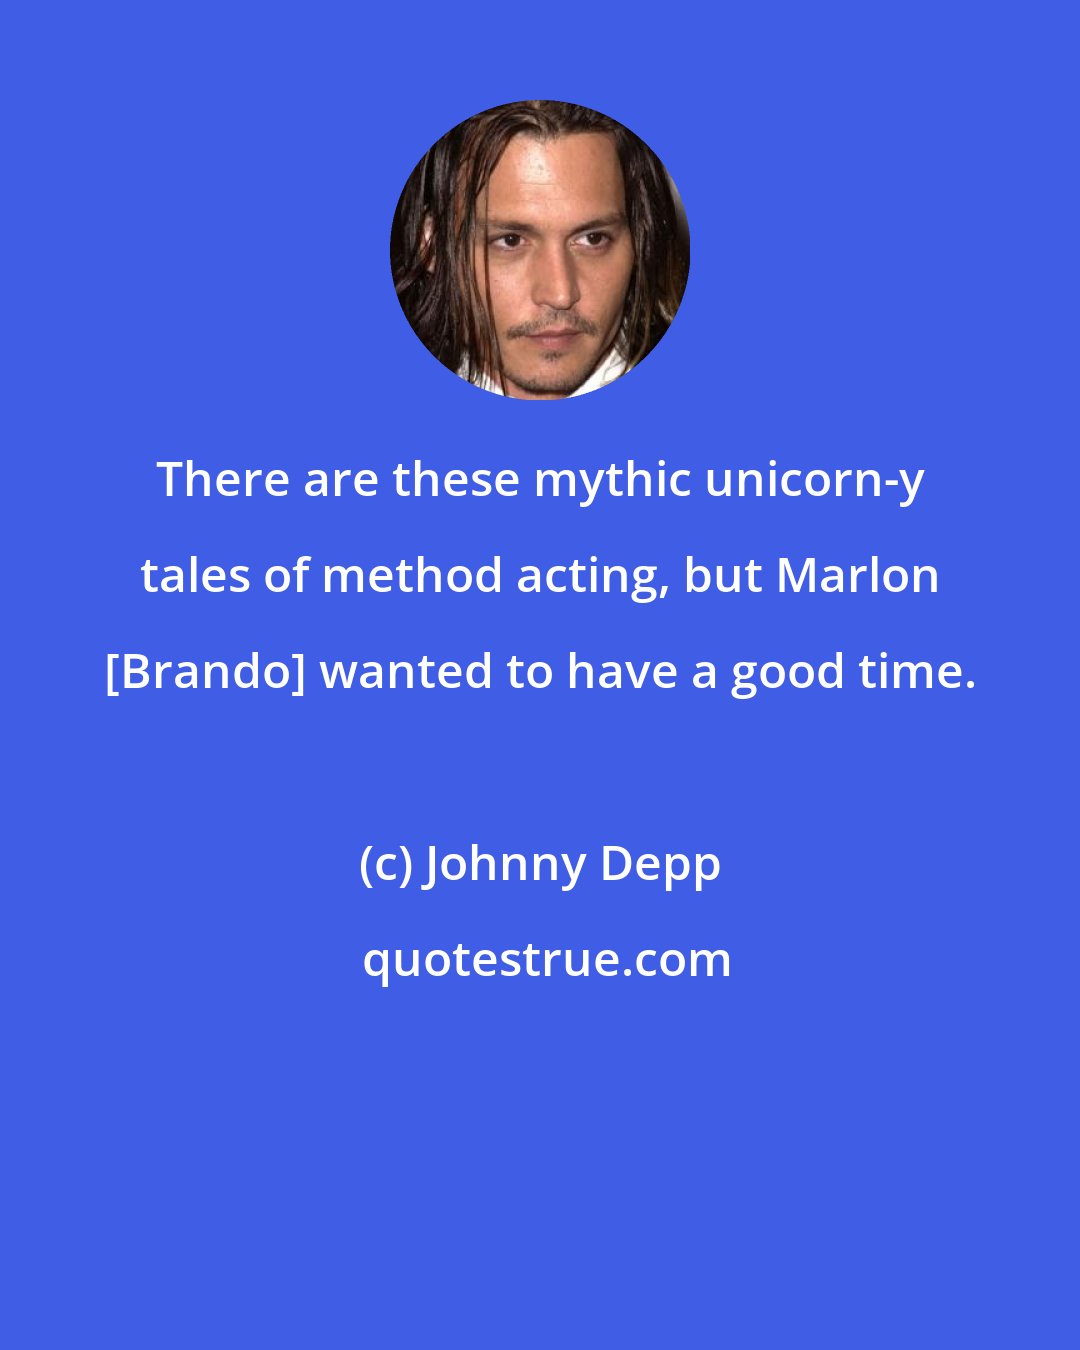 Johnny Depp: There are these mythic unicorn-y tales of method acting, but Marlon [Brando] wanted to have a good time.